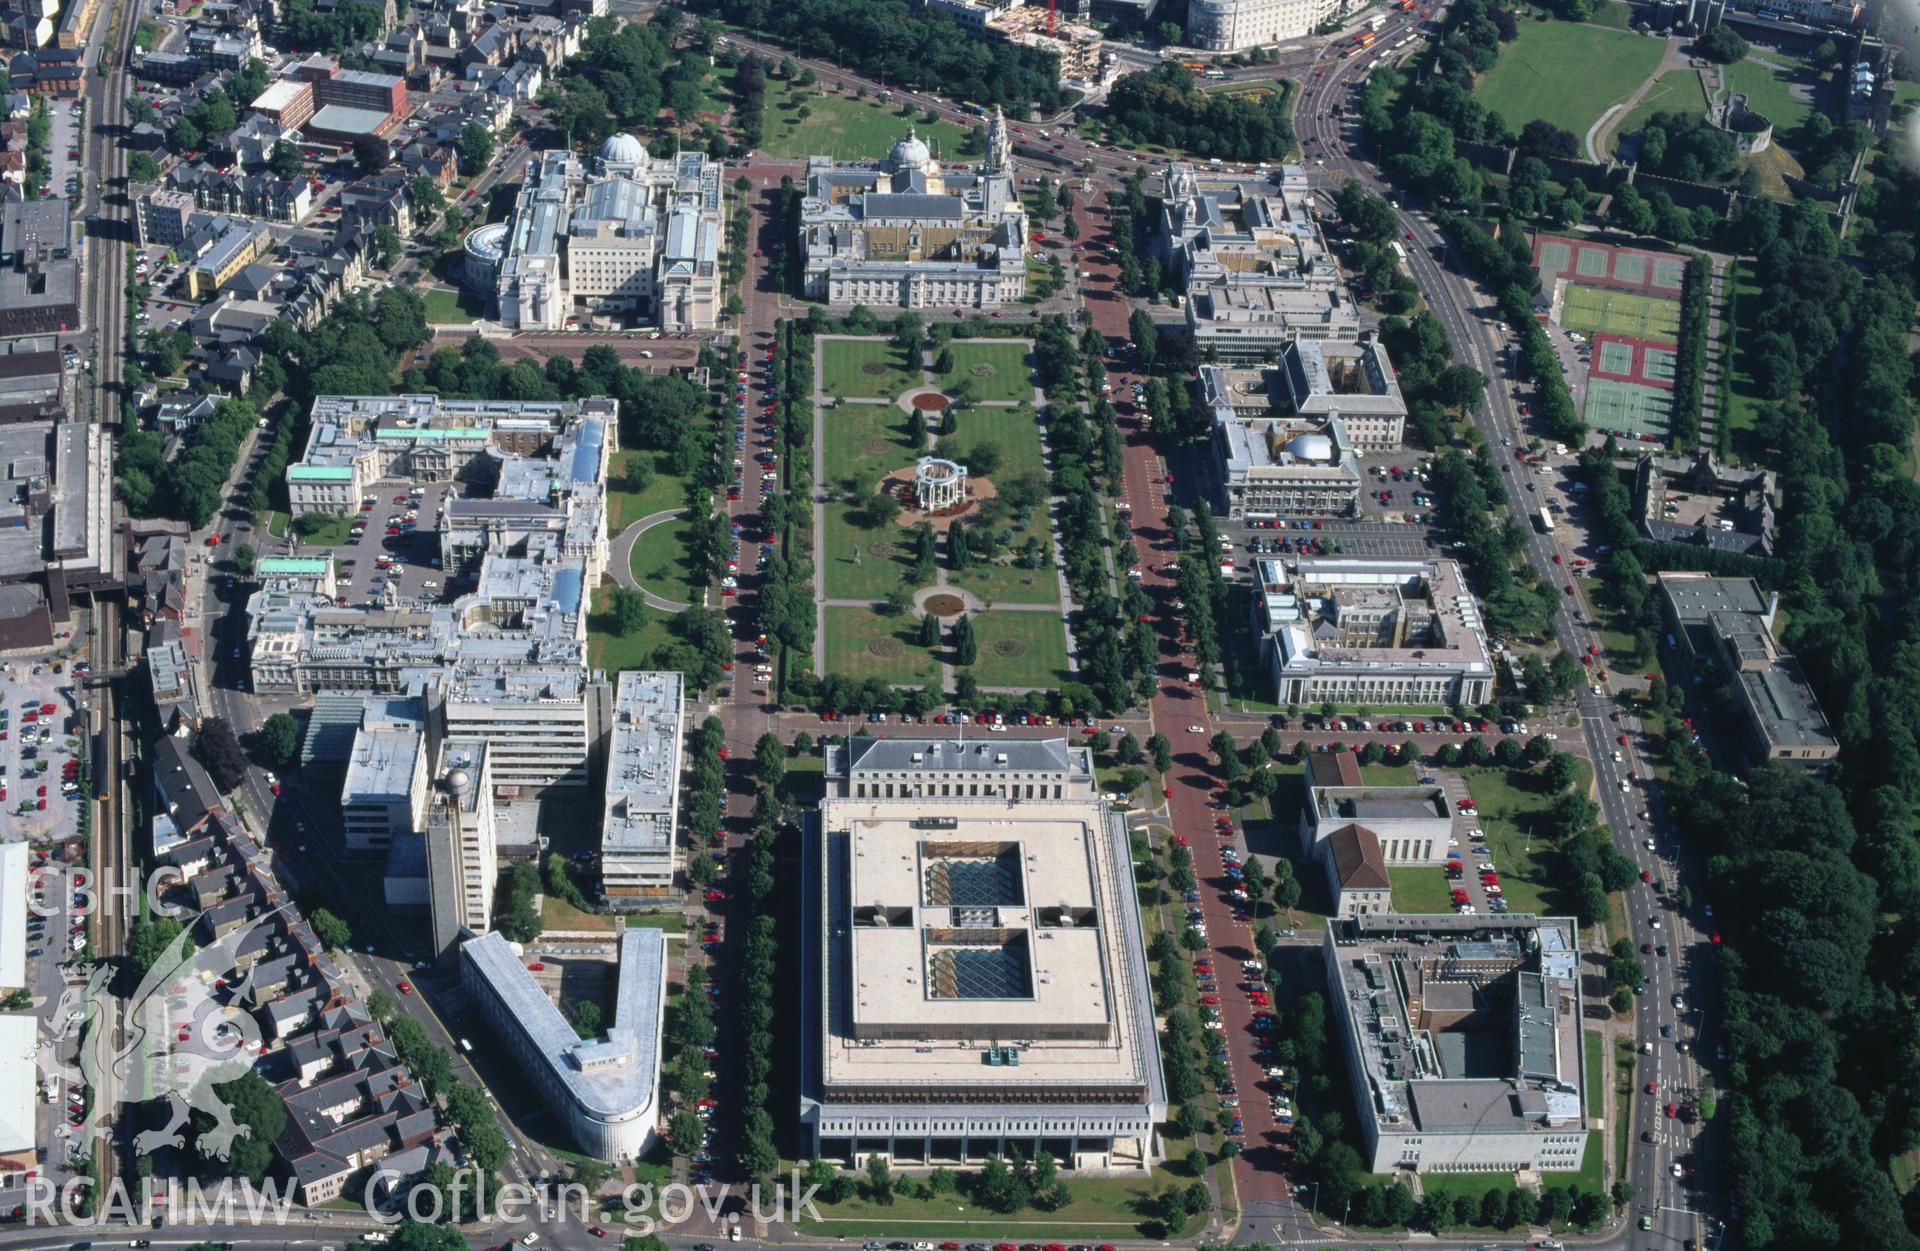 RCAHMW colour oblique aerial photograph of Cathays Park taken on 20/07/1995 by C.R. Musson